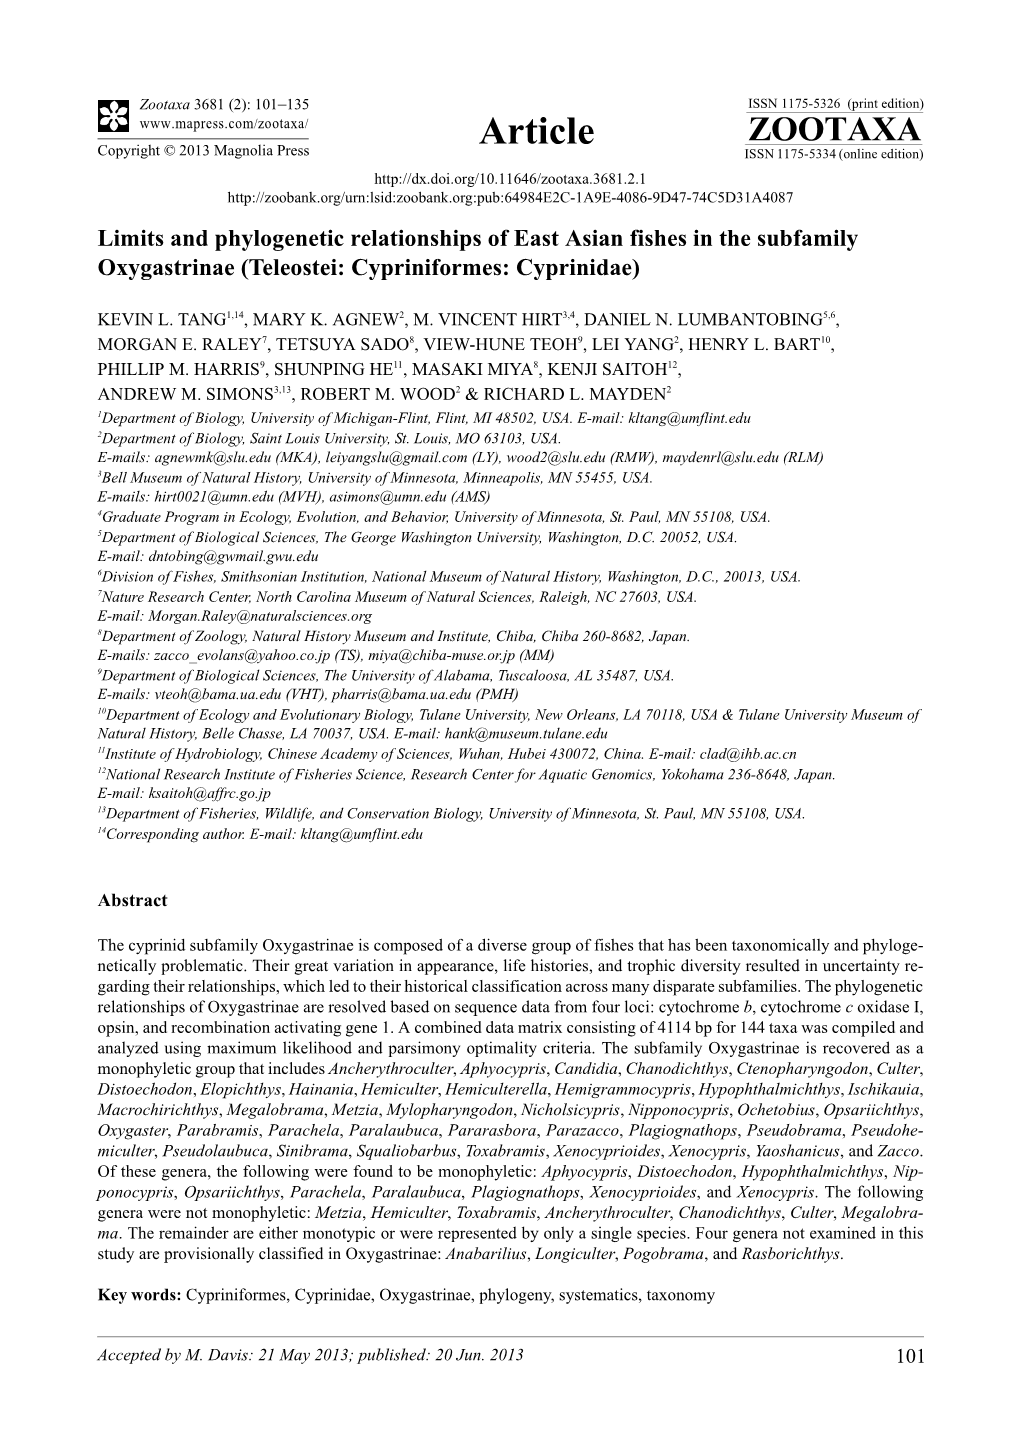 Limits and Phylogenetic Relationships of East Asian Fishes in the Subfamily Oxygastrinae (Teleostei: Cypriniformes: Cyprinidae)